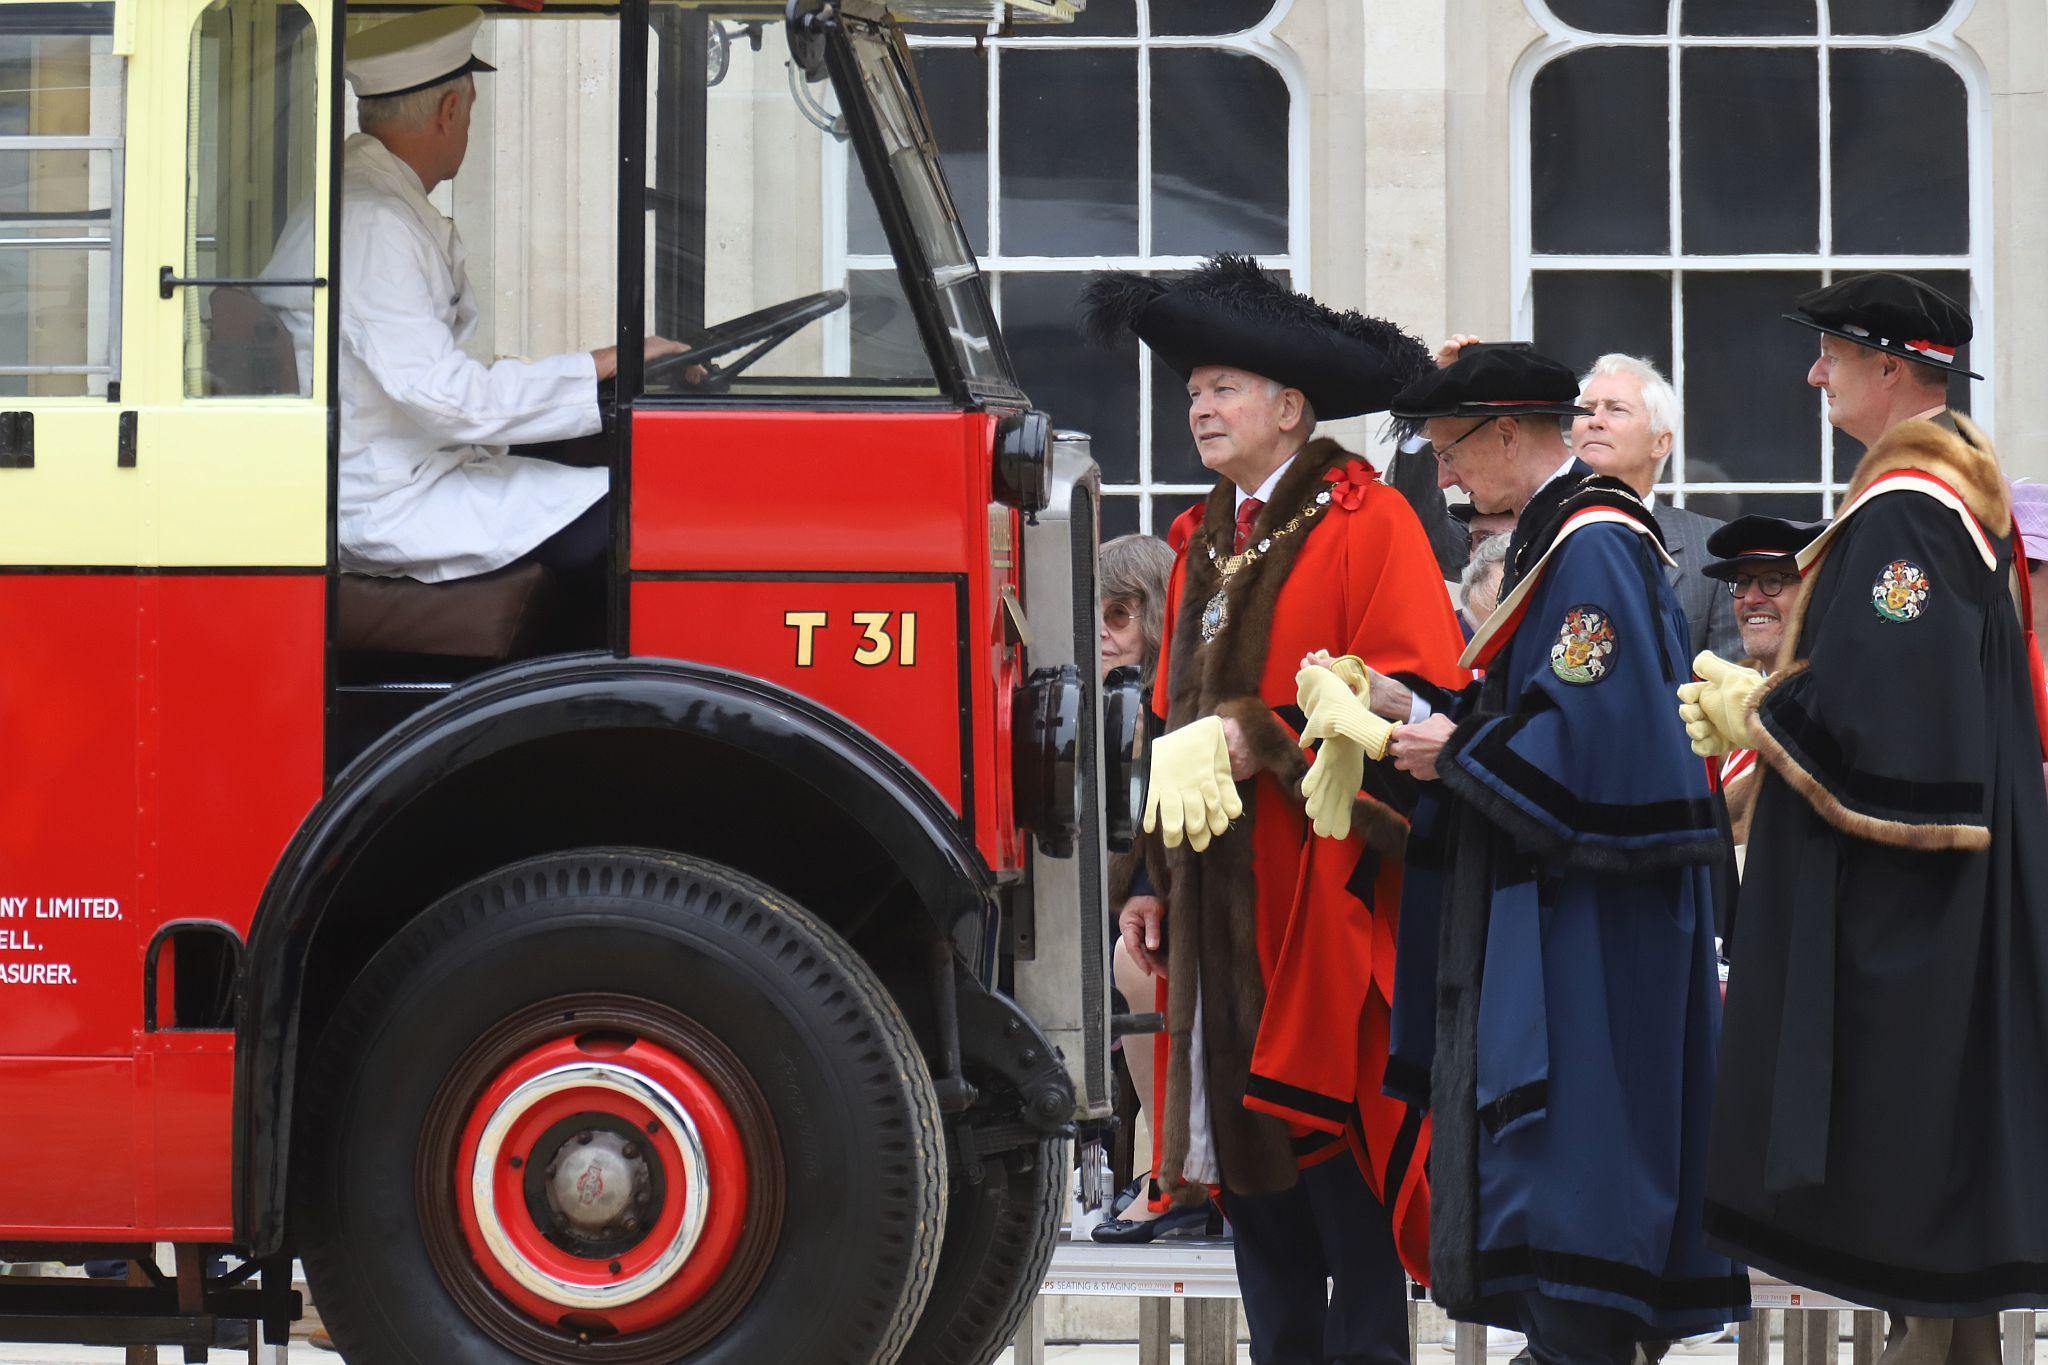 AEC Regal 1929 UU6646. City of London 2023 Cart Marking in Guildhall Yard on 22-Jul-2023. Hosted by the Worshipful Company of Carmen with the Lord Mayor of the City of London in attendance. Wooden plates on the vehicles are branded with hot irons to allow them to ply for trade in the Square Mile. Another of the City Livery Company's annual ceremonies.